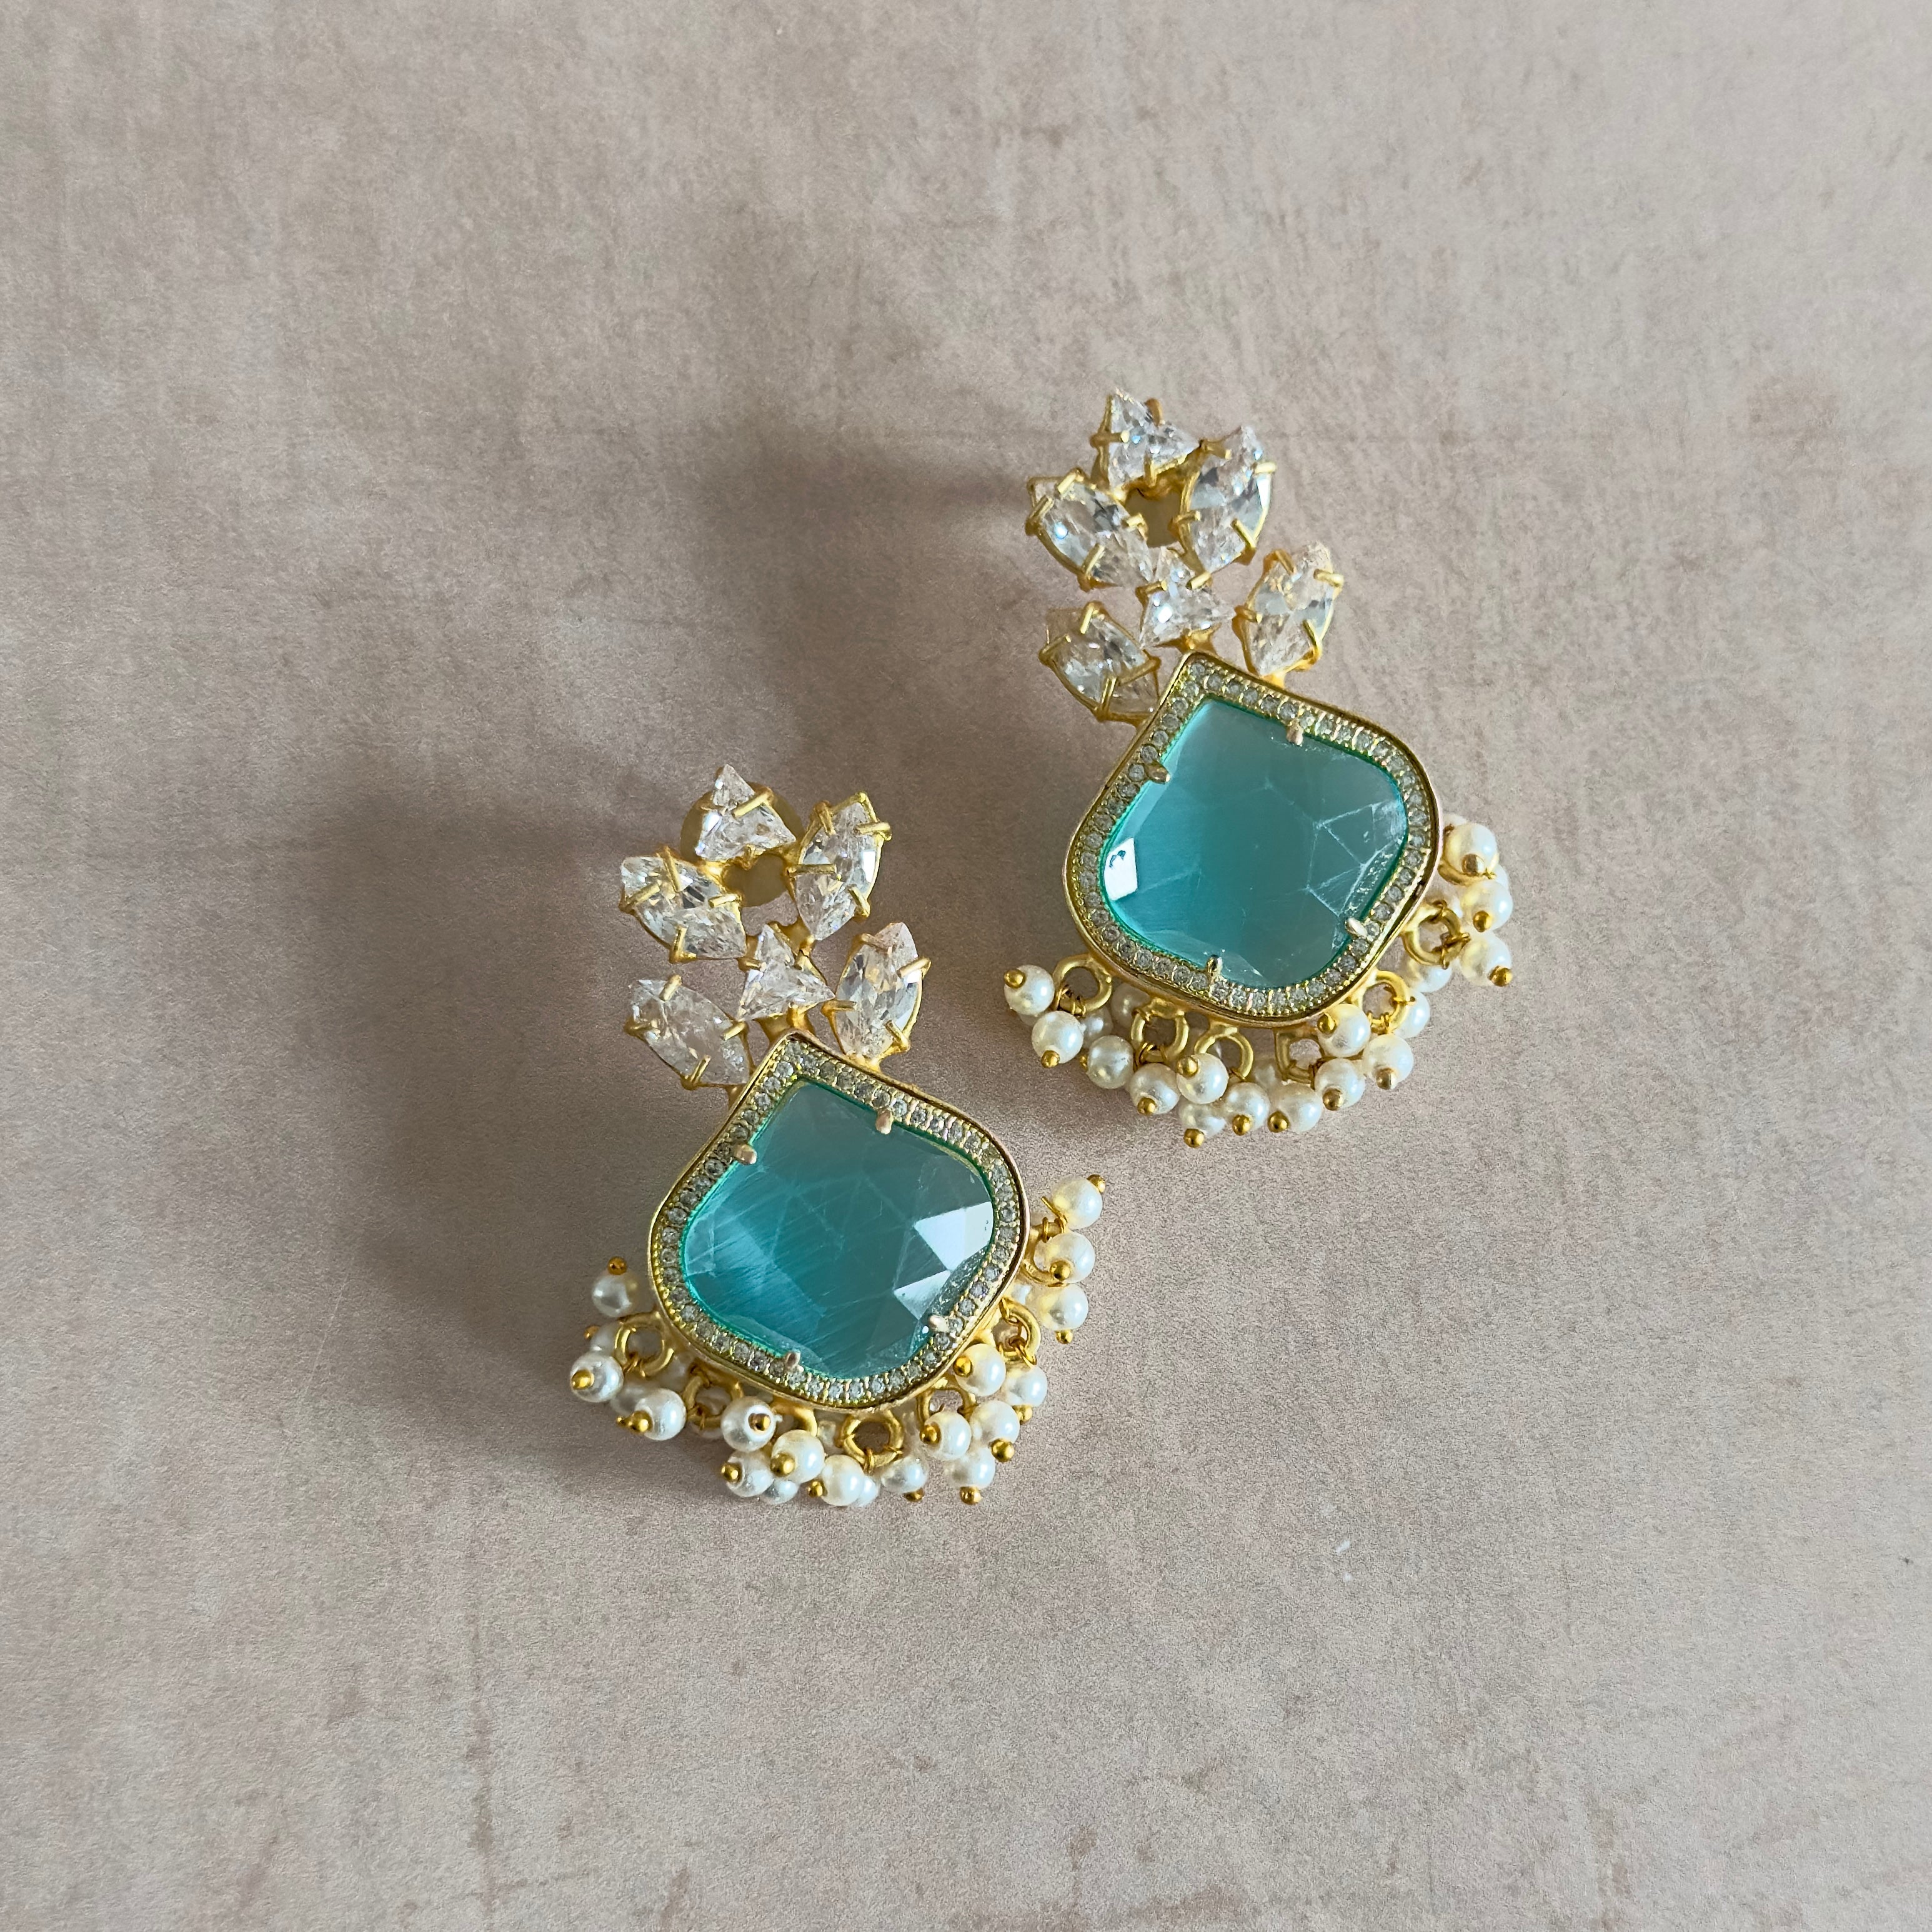 Indulge in the beauty and luxury of Isabella Crystal Earrings! These stunning statement earrings feature luscious aquamarine stones, inspired by the captivating waters of the Indian Ocean. With the added sparkle of cubic zirconia, these earrings will make a bold and glamorous addition to any outfit. Elevate your style and make a statement with Isabella.